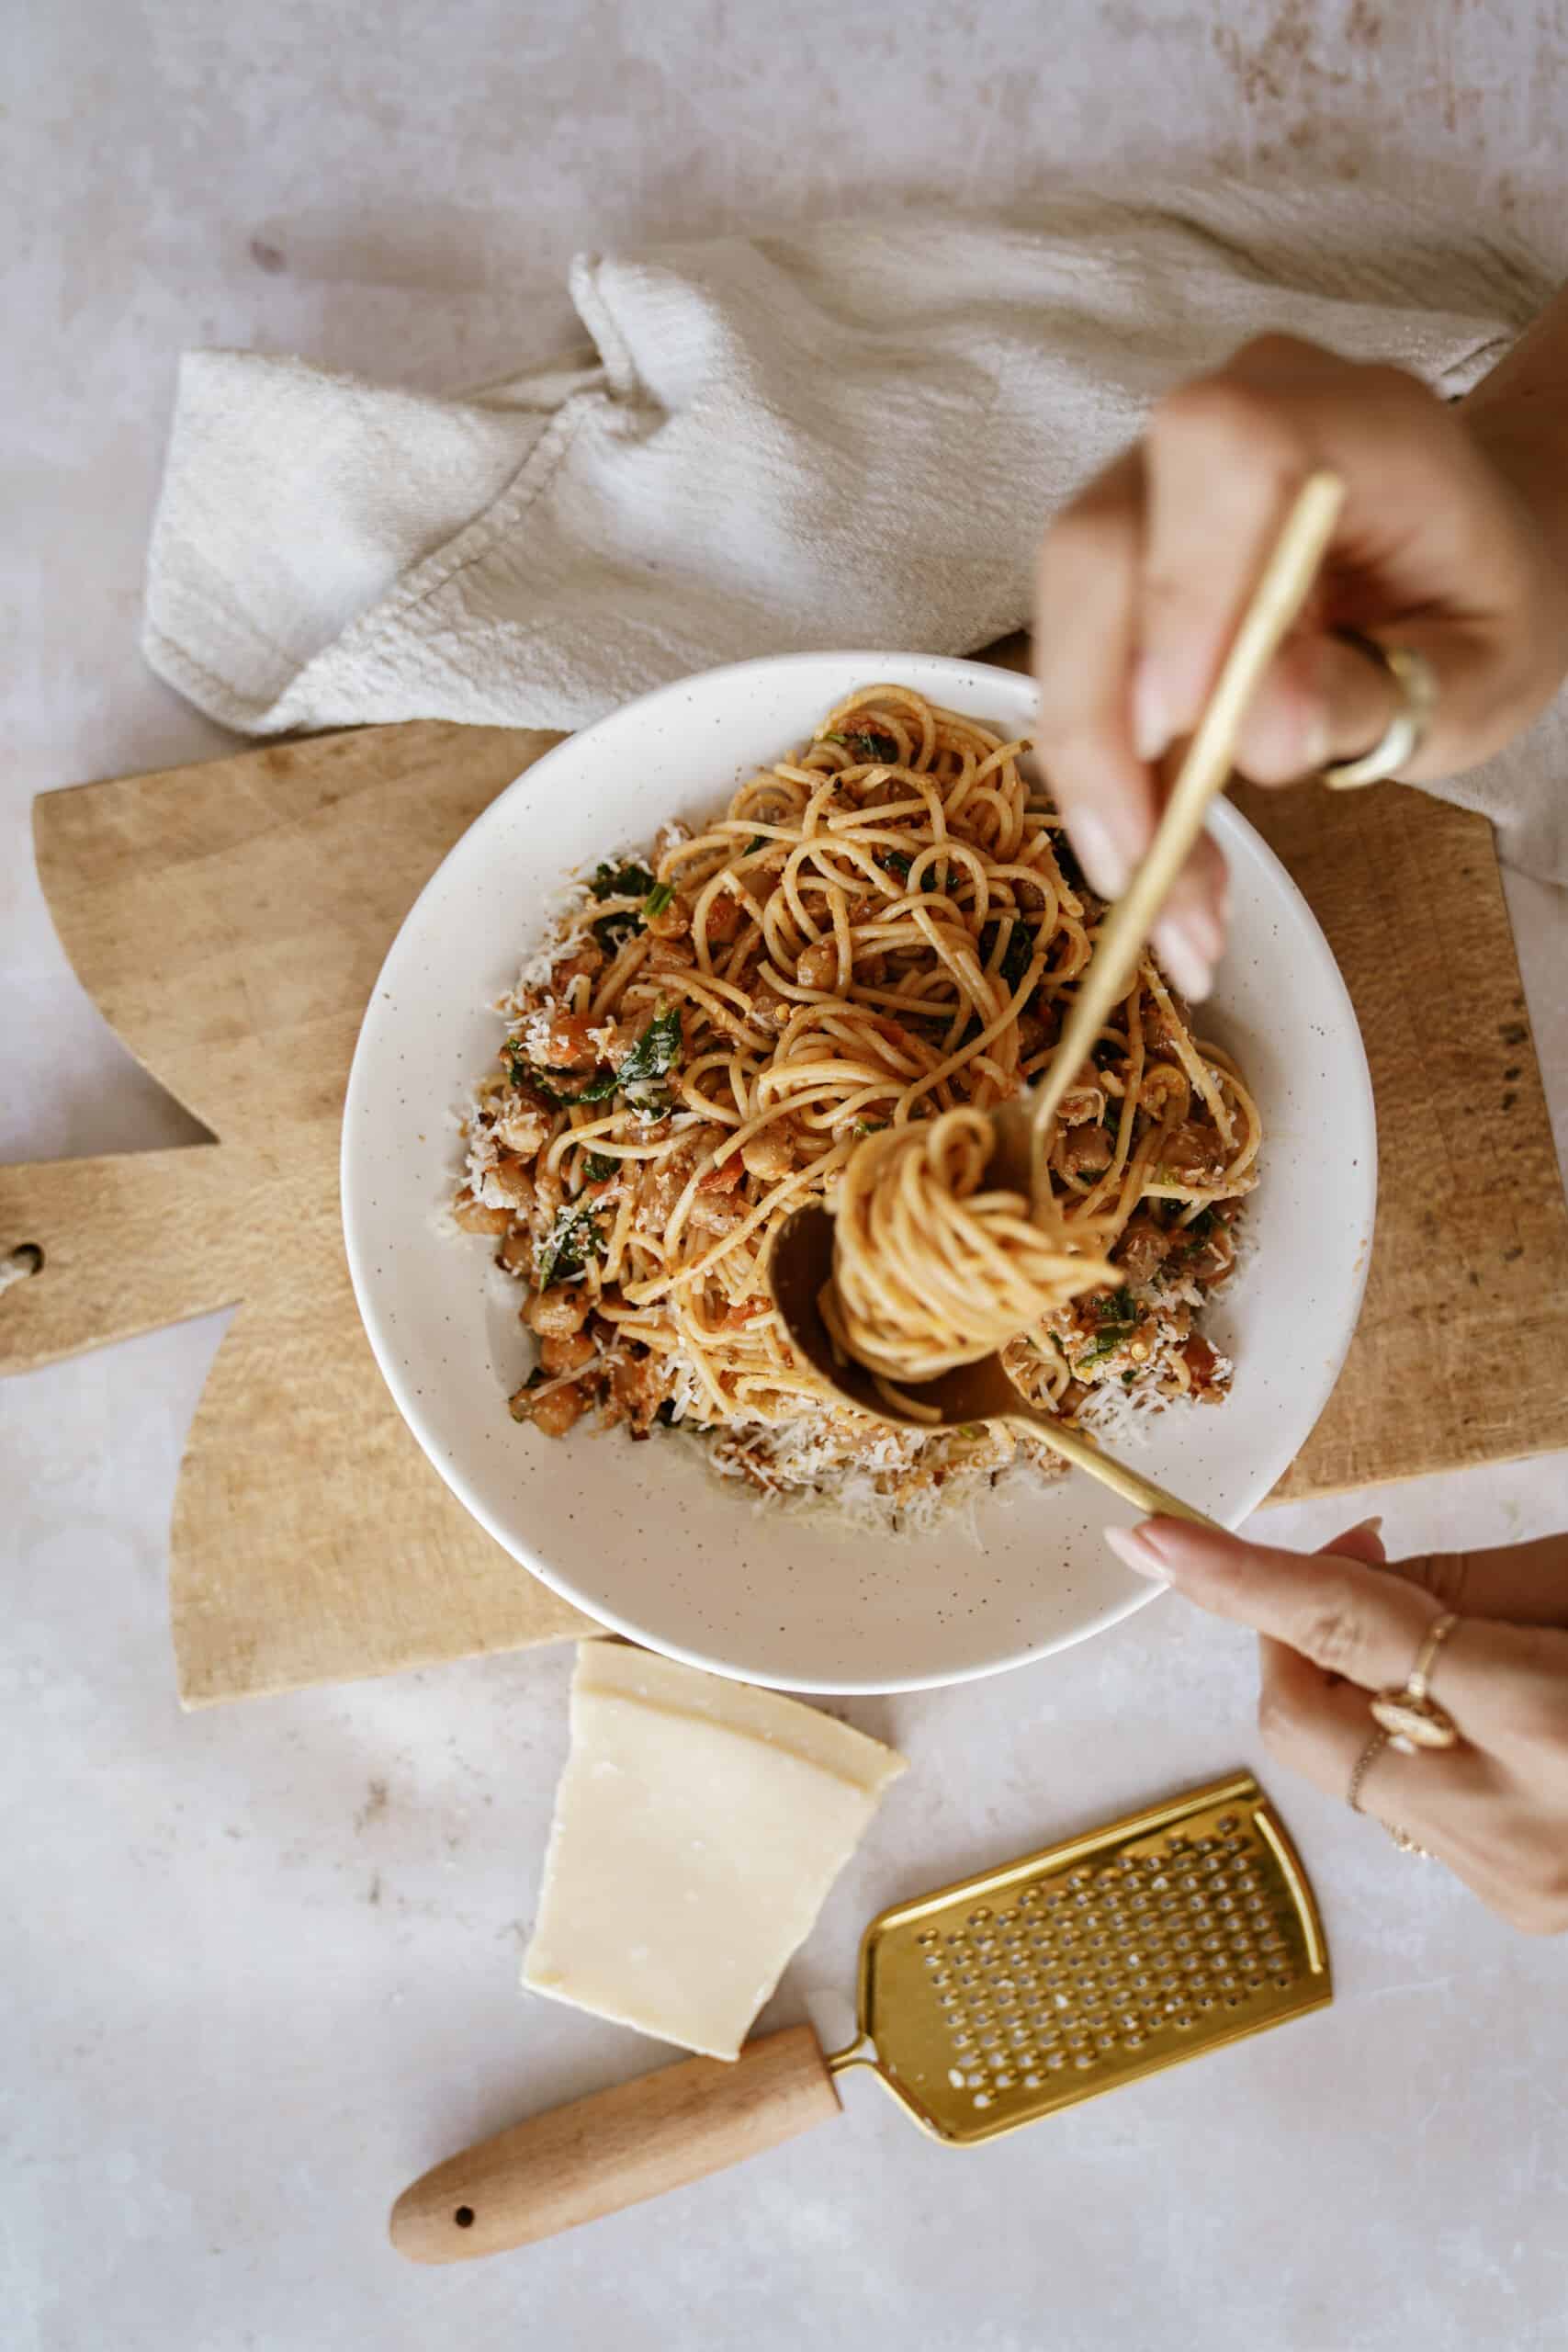 Chickpea pasta being twirled in white serving bowl